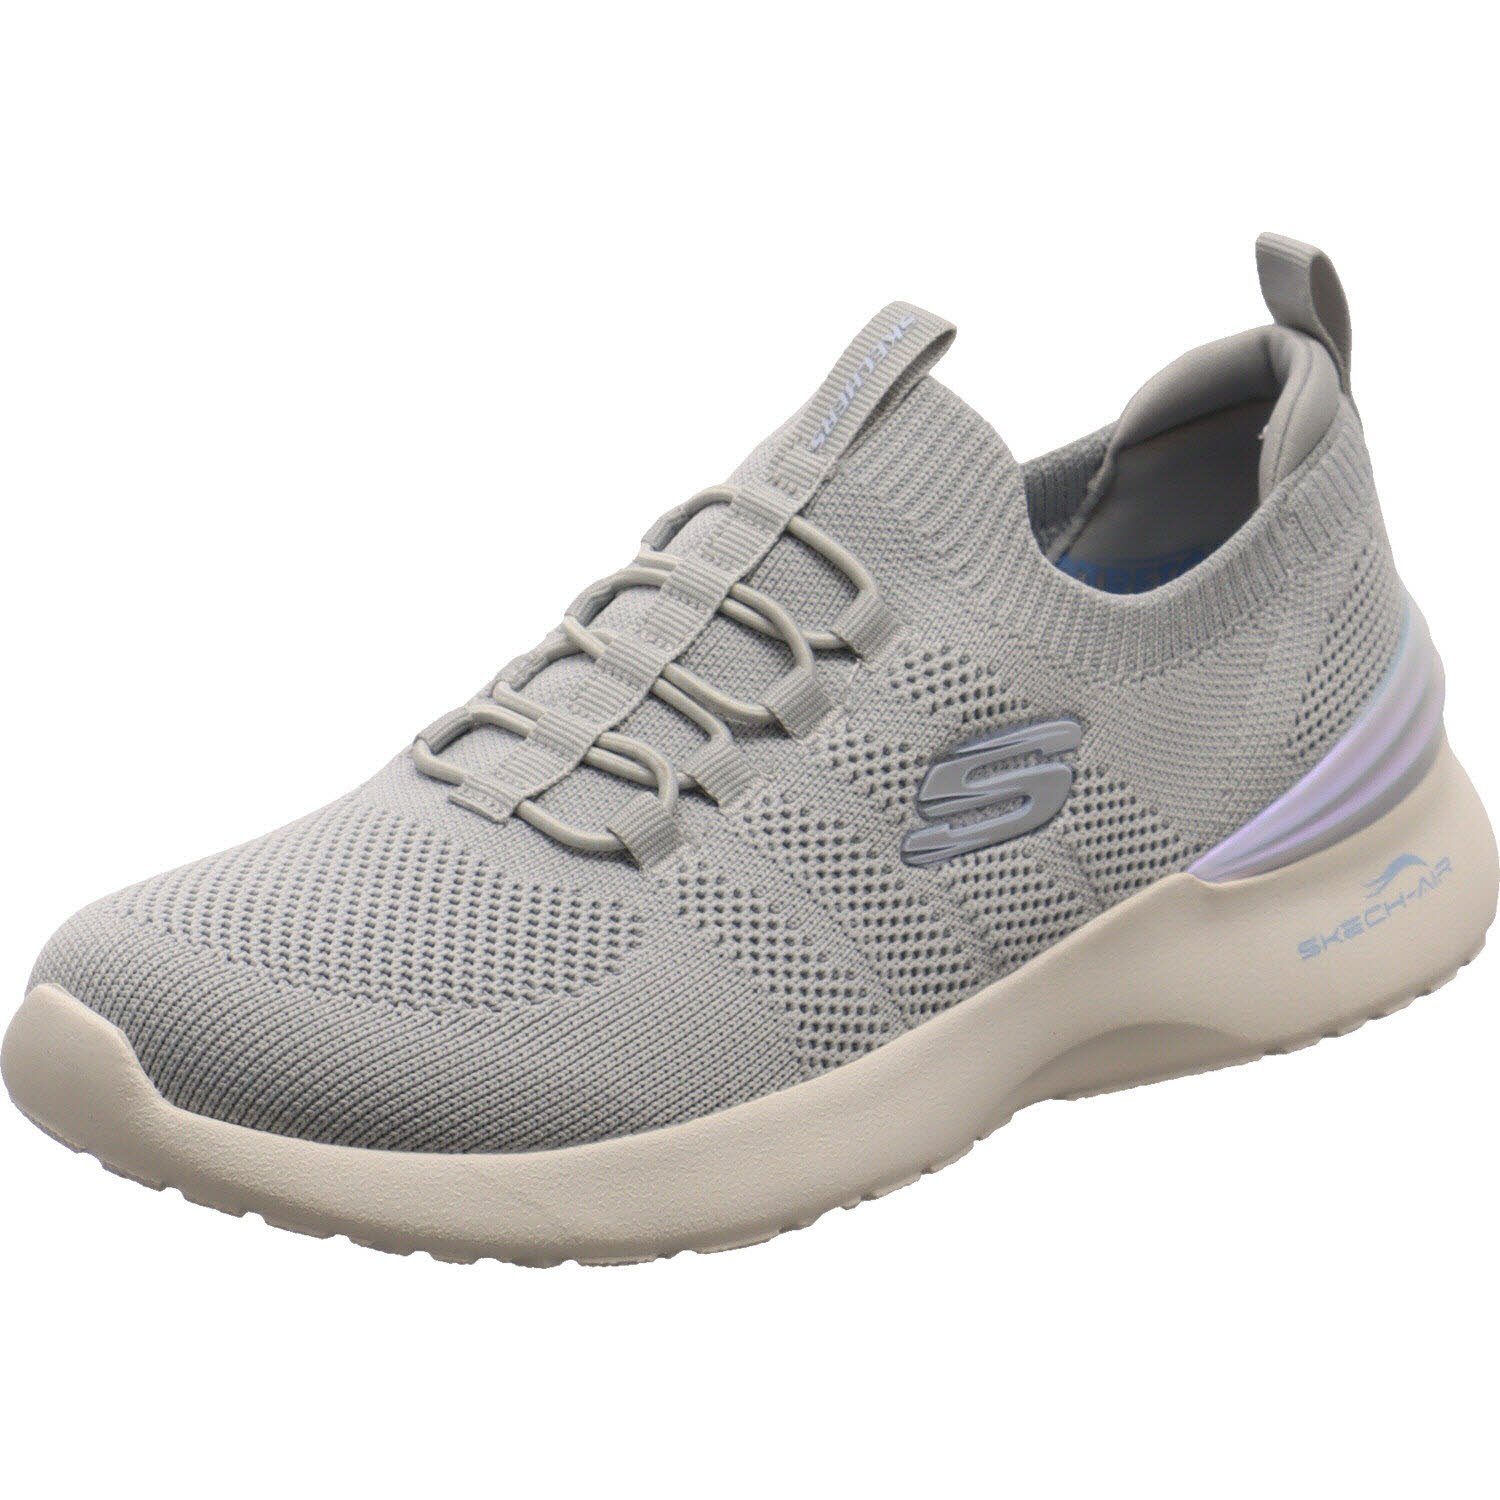 Skechers Skech-Air Dynamight Perfects - Slipper